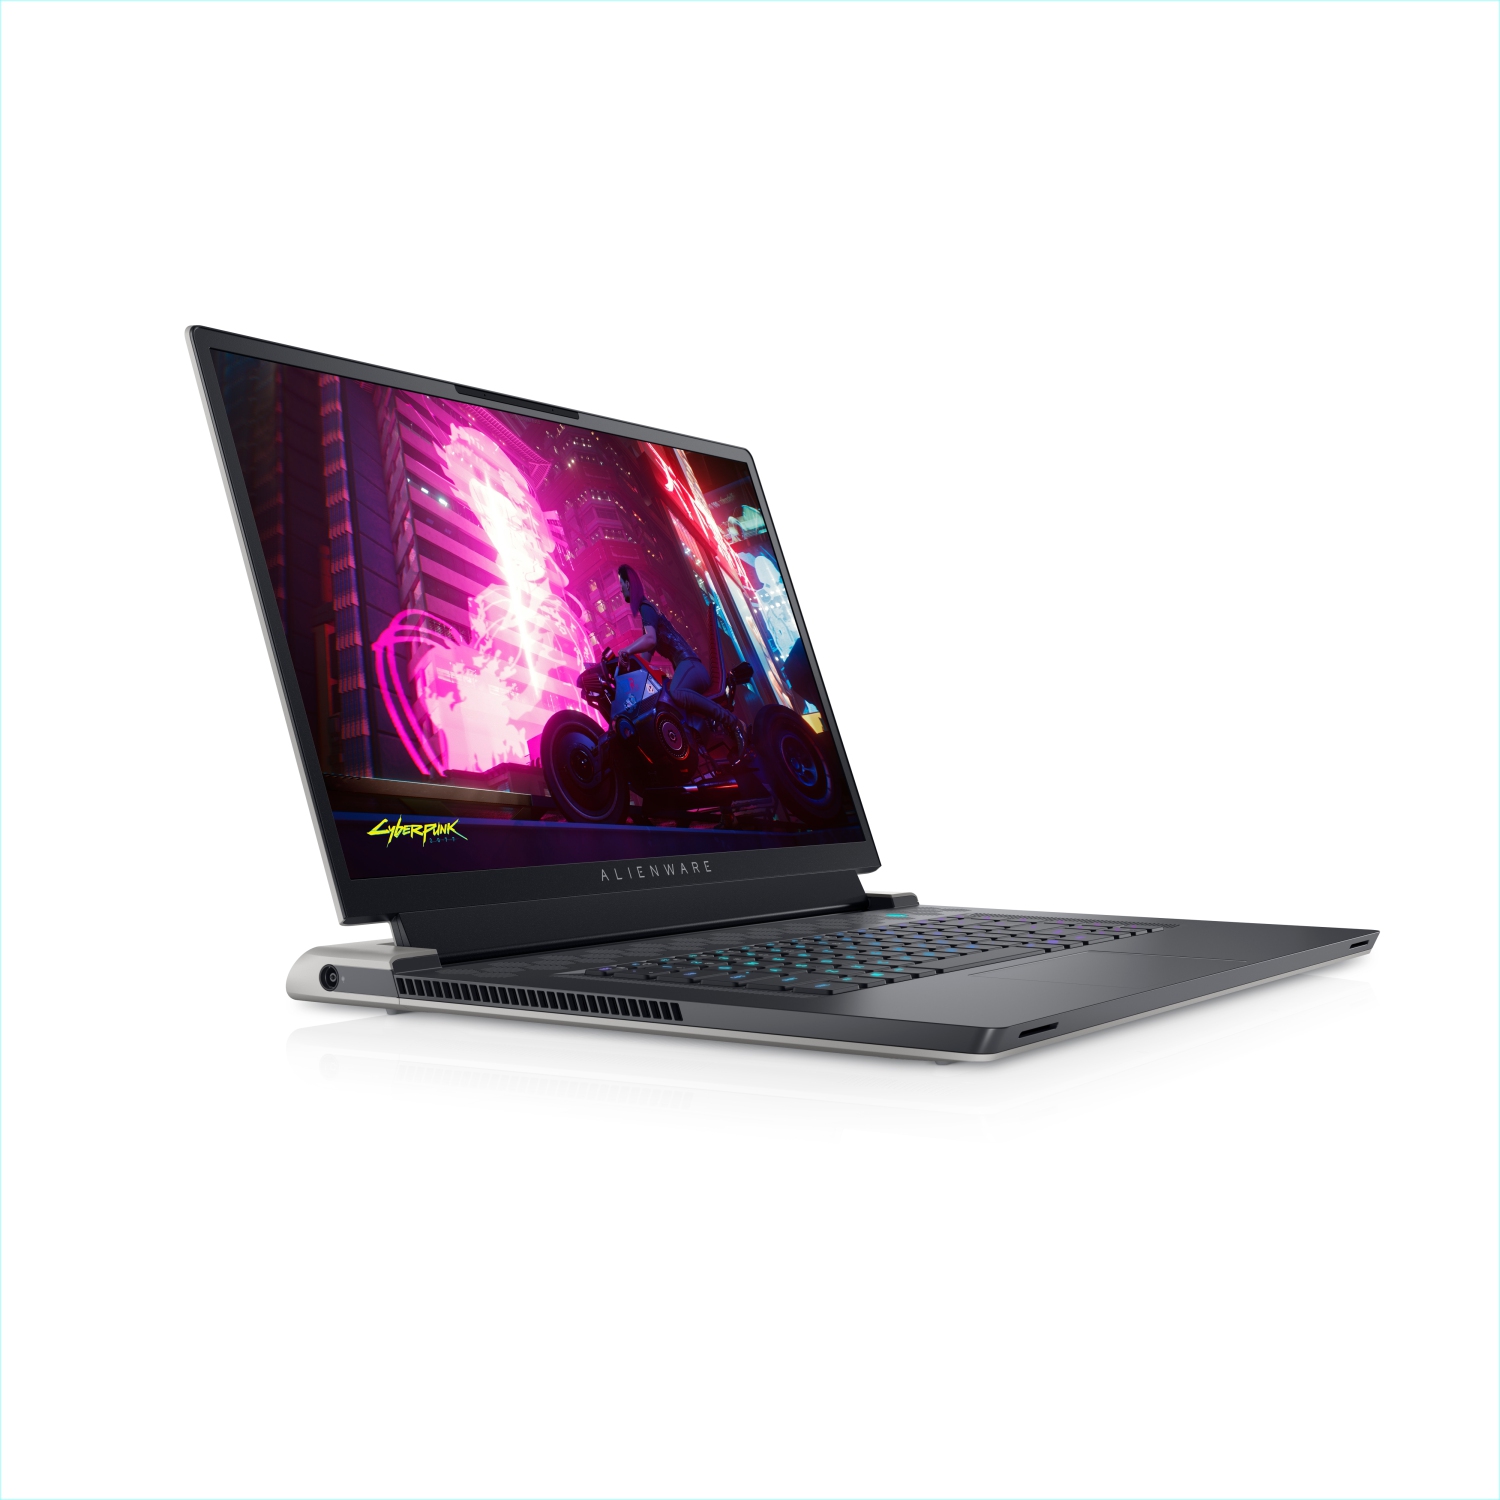 Refurbished (Excellent) - Dell Alienware X17 R1 Gaming Laptop (2021), 17.3" 4K, Core i7, 2TB SSD + 2TB SSD, 32GB RAM, RTX 3080, 4.6 GHz, 11th Gen CPU Certified